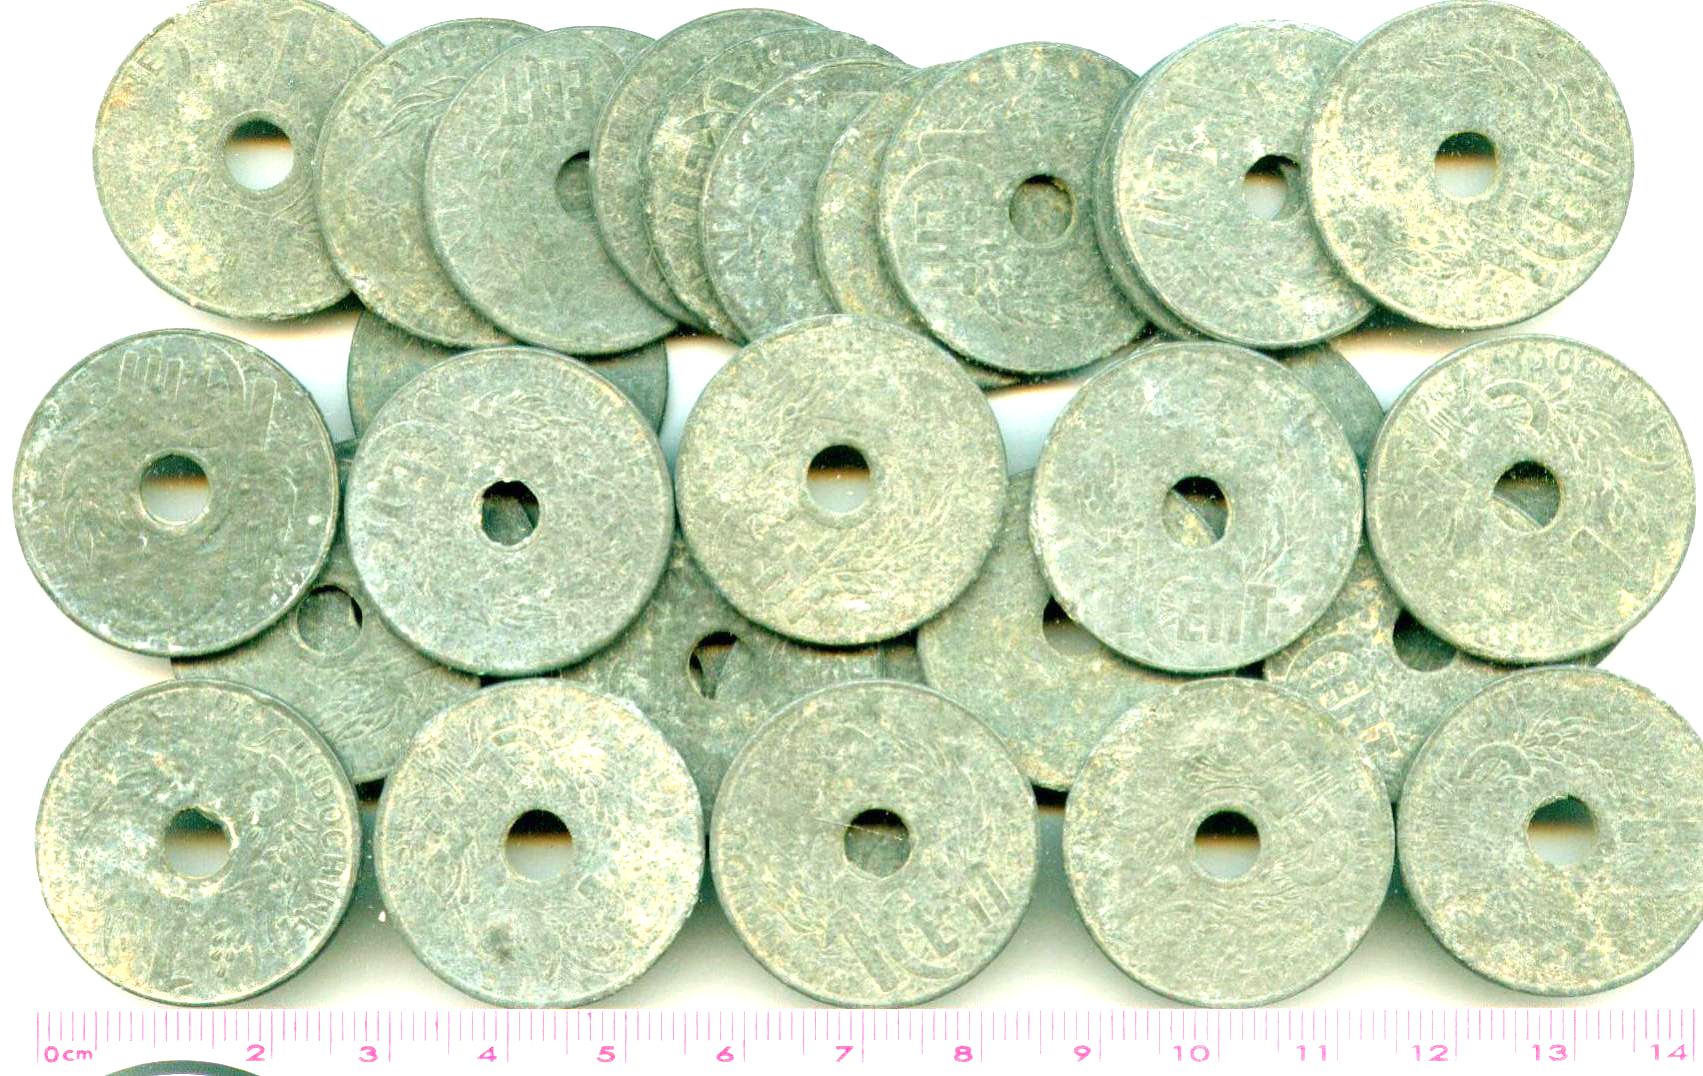 V3072, Wholesale French Indo-China 1 Cent Coins (1940's), 10 Pcs